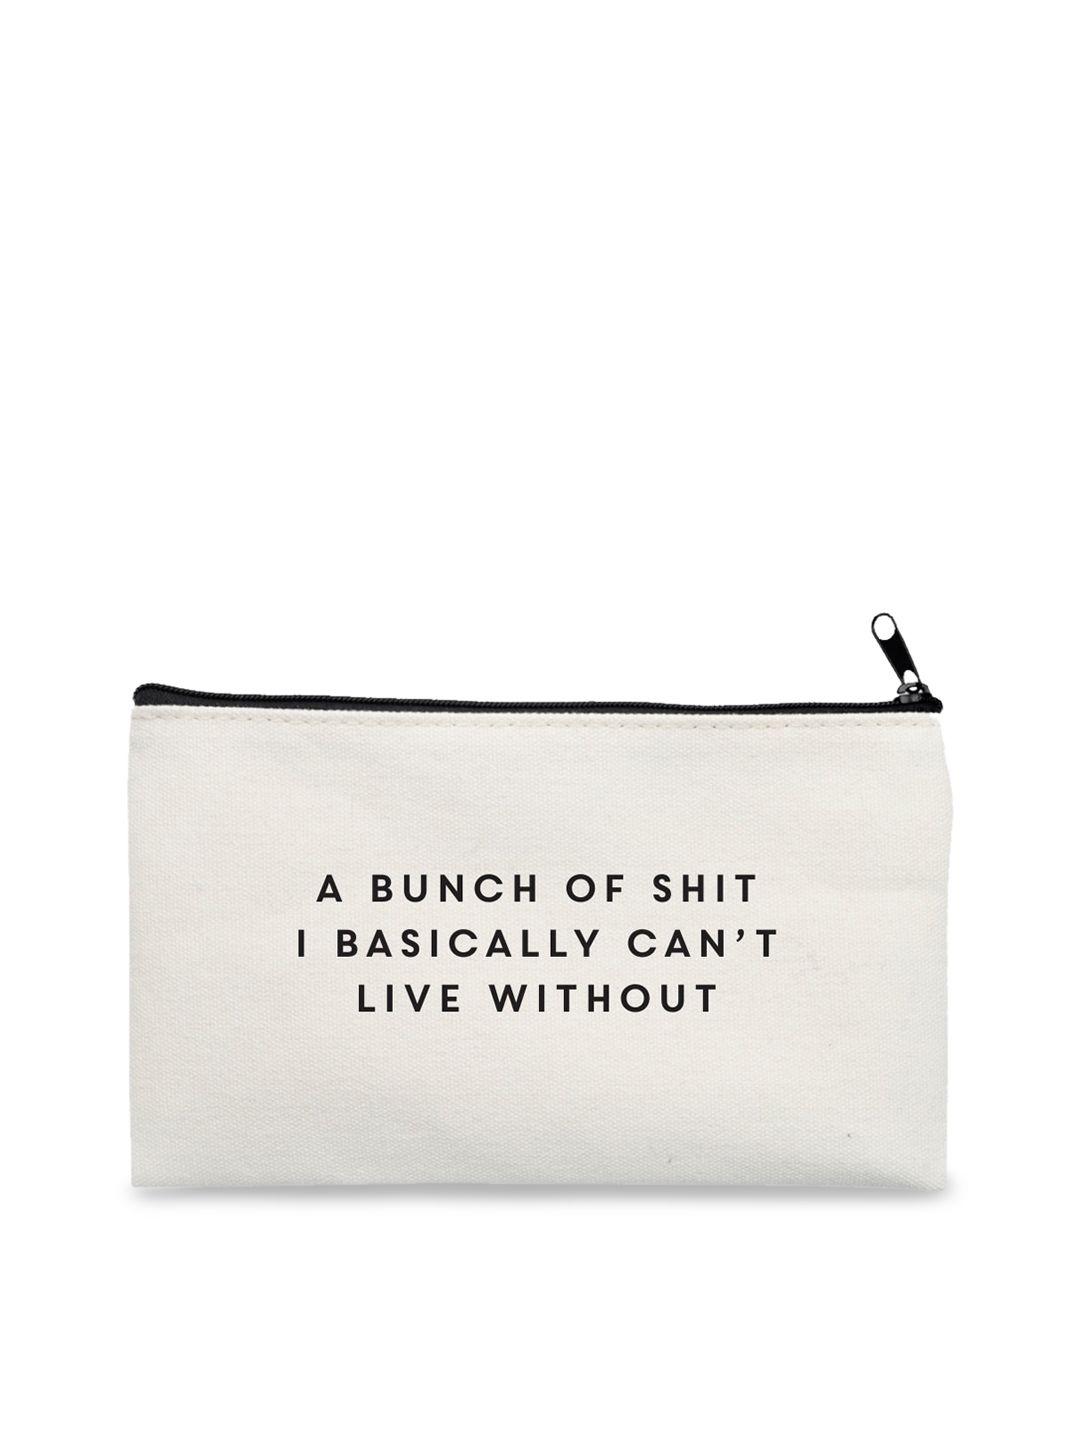 the art people unisex off white & black printed travel pouch